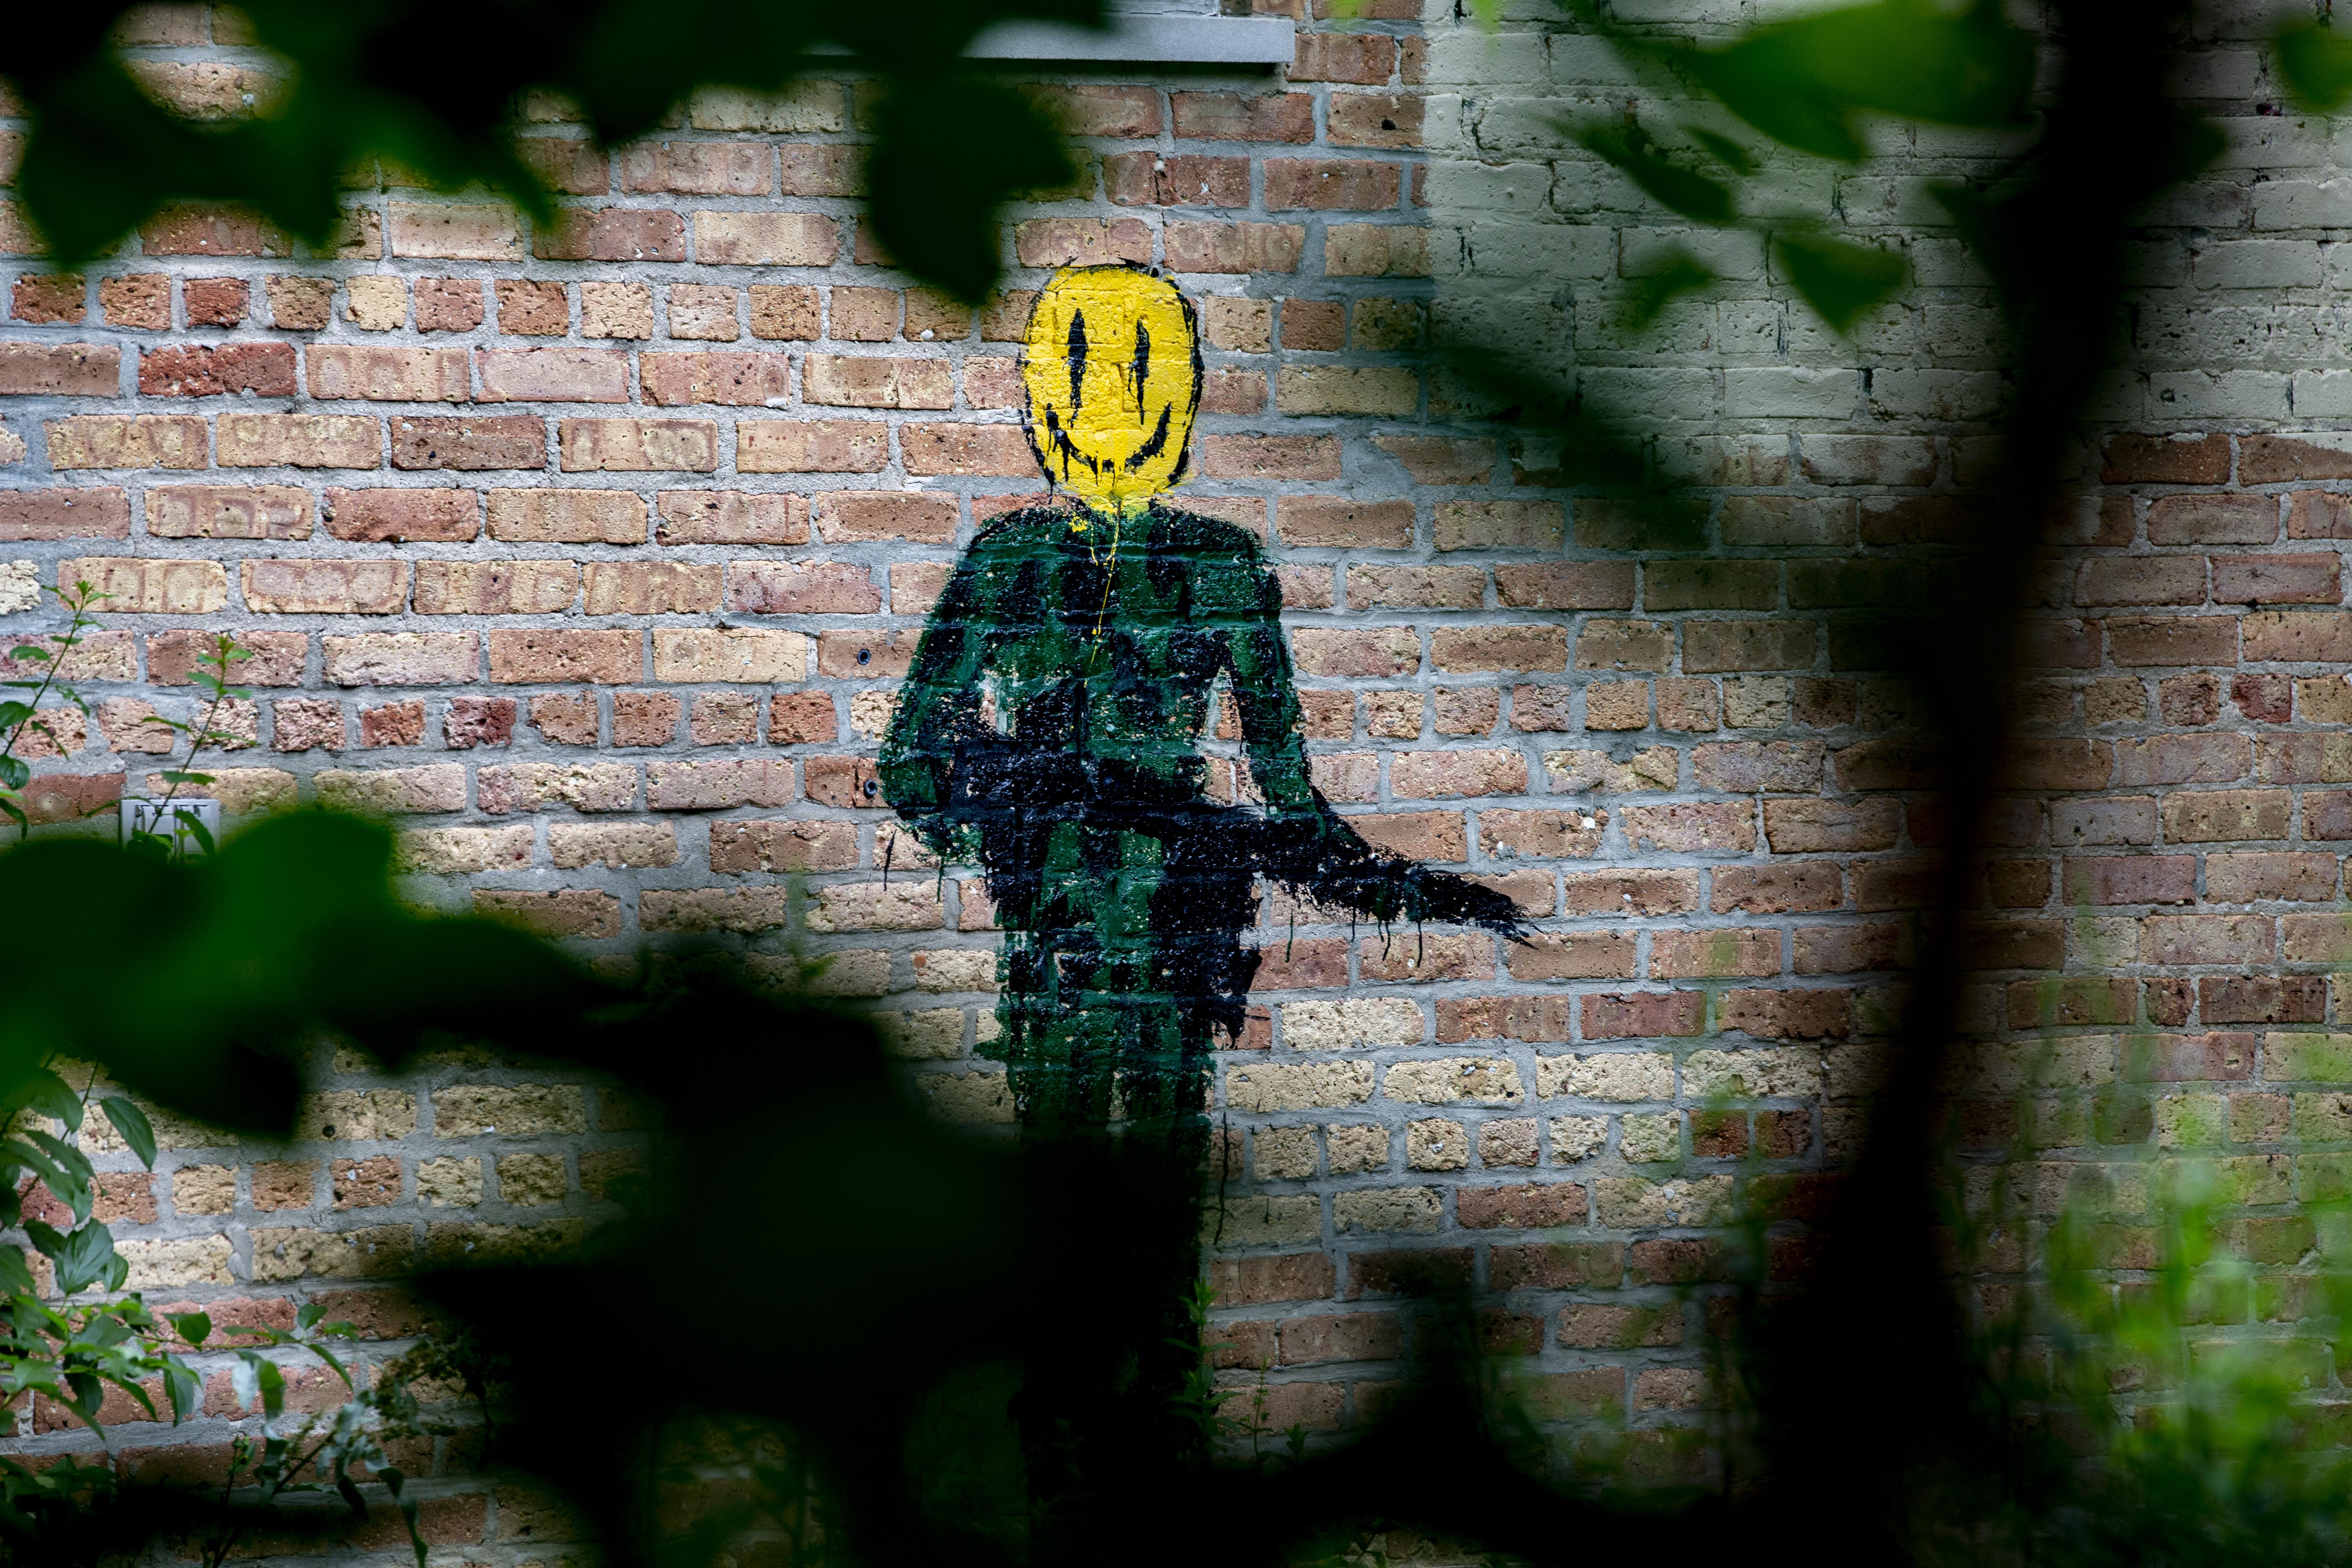 Through foliage, we see brick wall with a mural of a person in fatigues, with a yellow smiley face for a head, holding an automatic weapon.